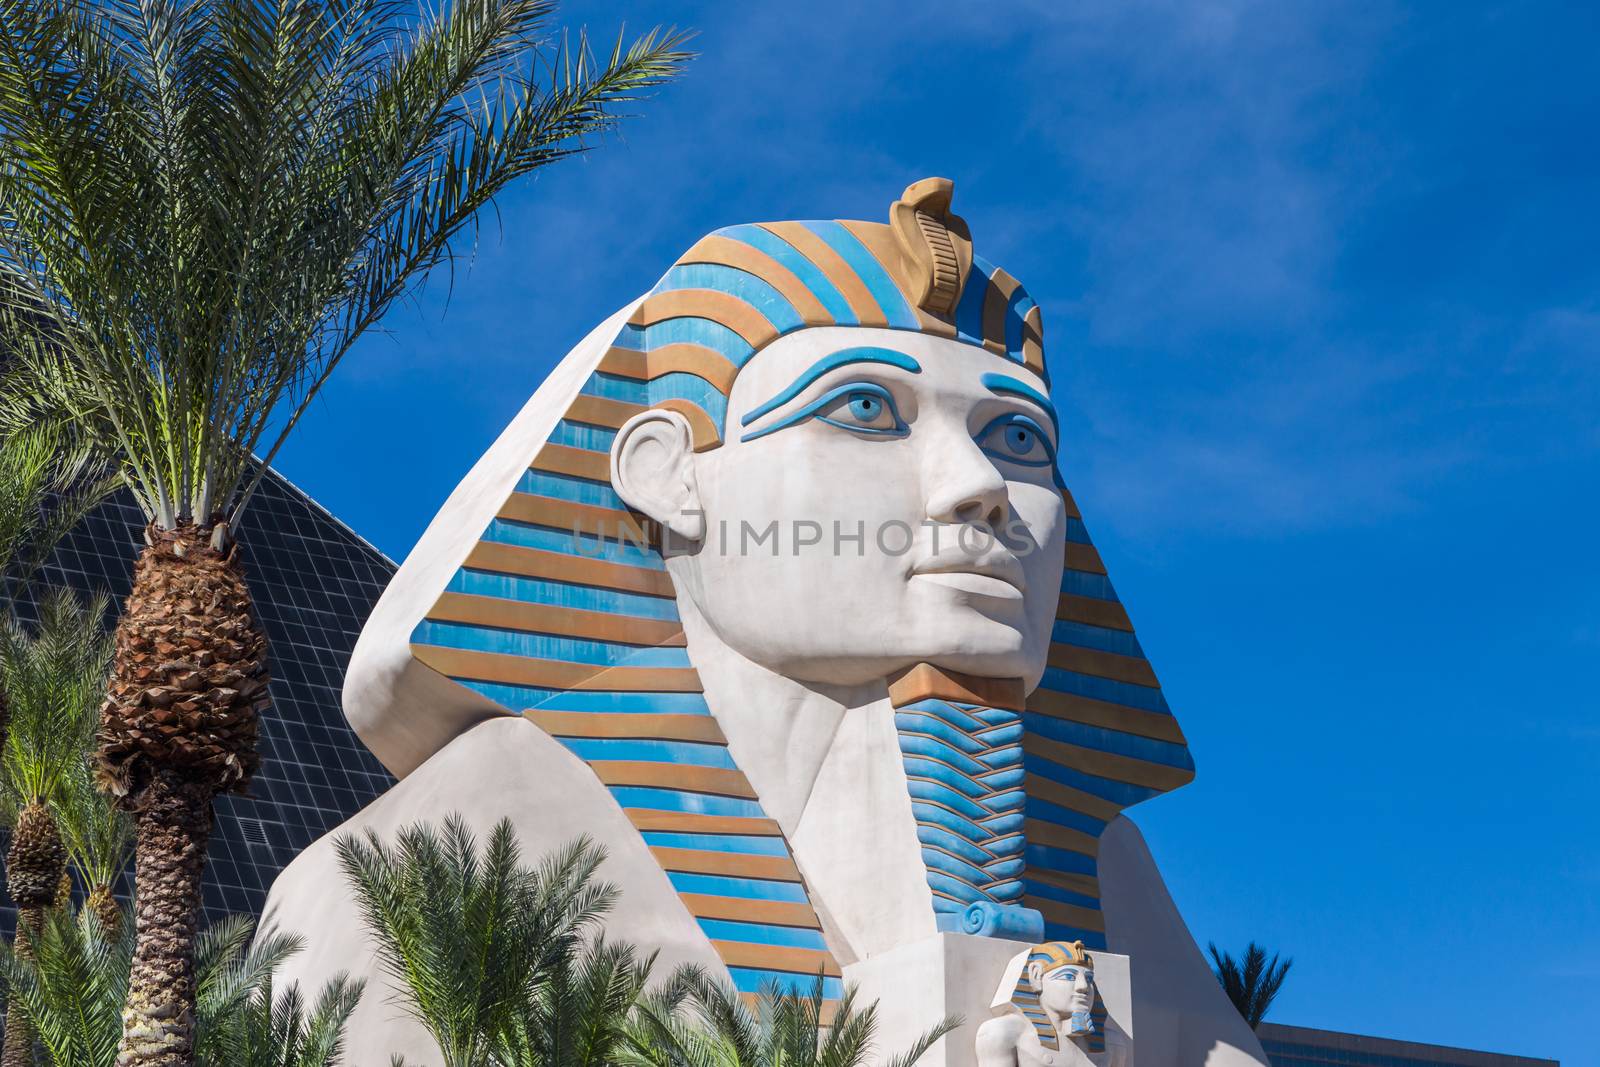 The Great Sphinx of Giza at Luxor Las Vegas by wolterk